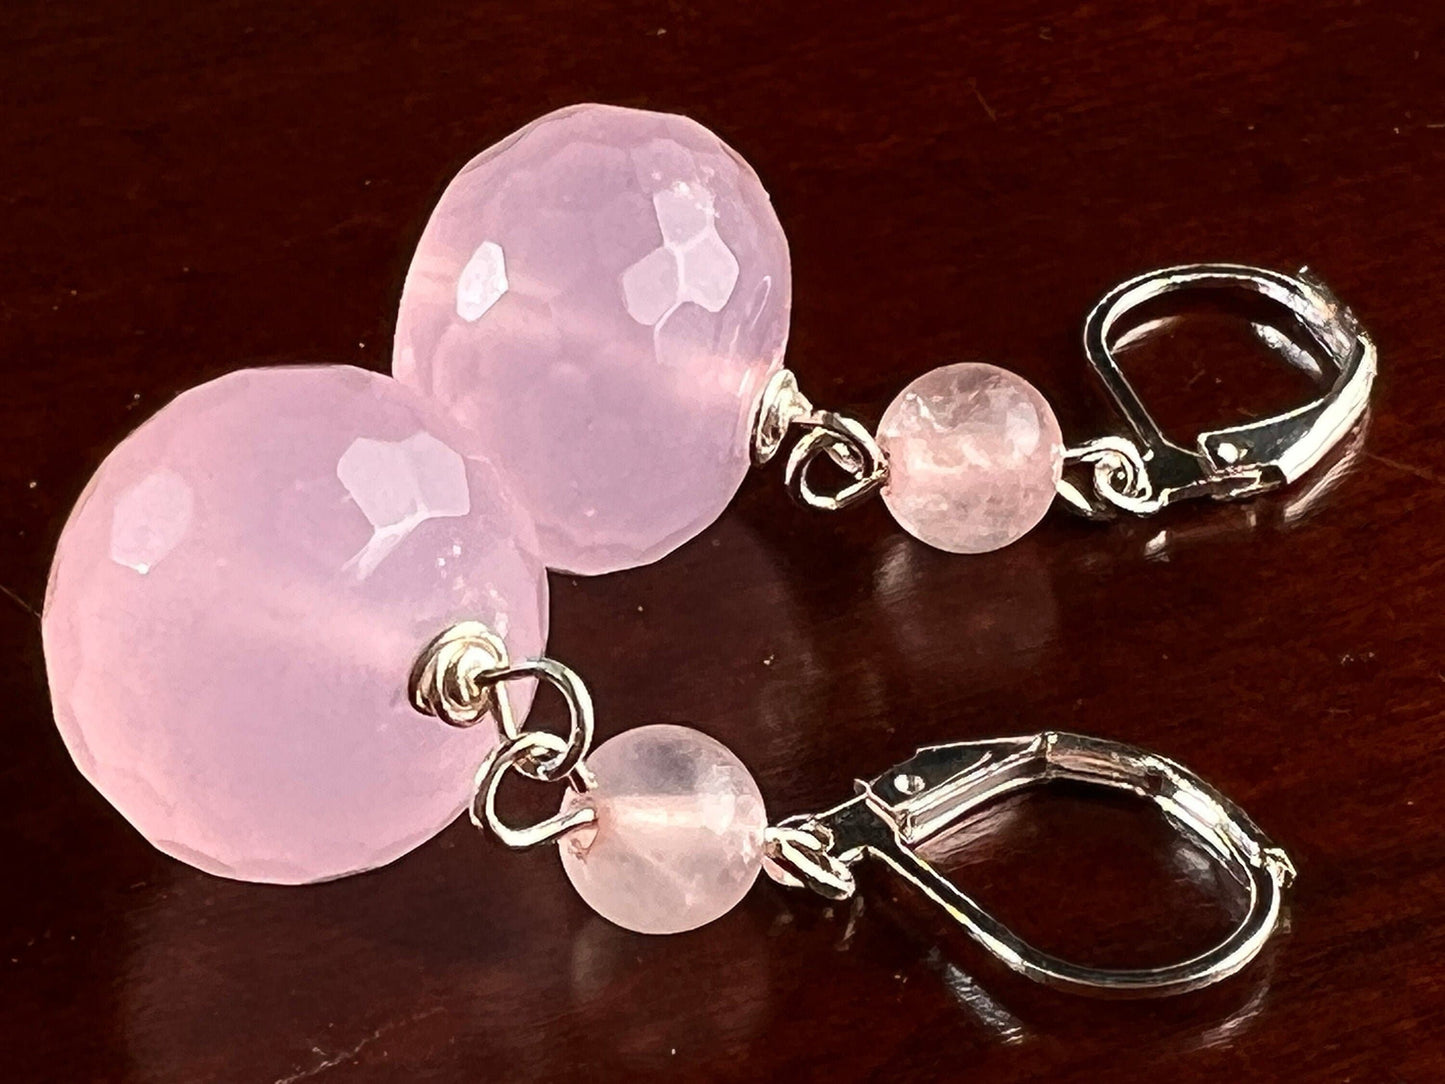 Natural Rose Quartz Faceted Large Roundel 14mm, Spacer 4mm Rose Quartz Wire Wrapped in Silver Leverback or Earwire